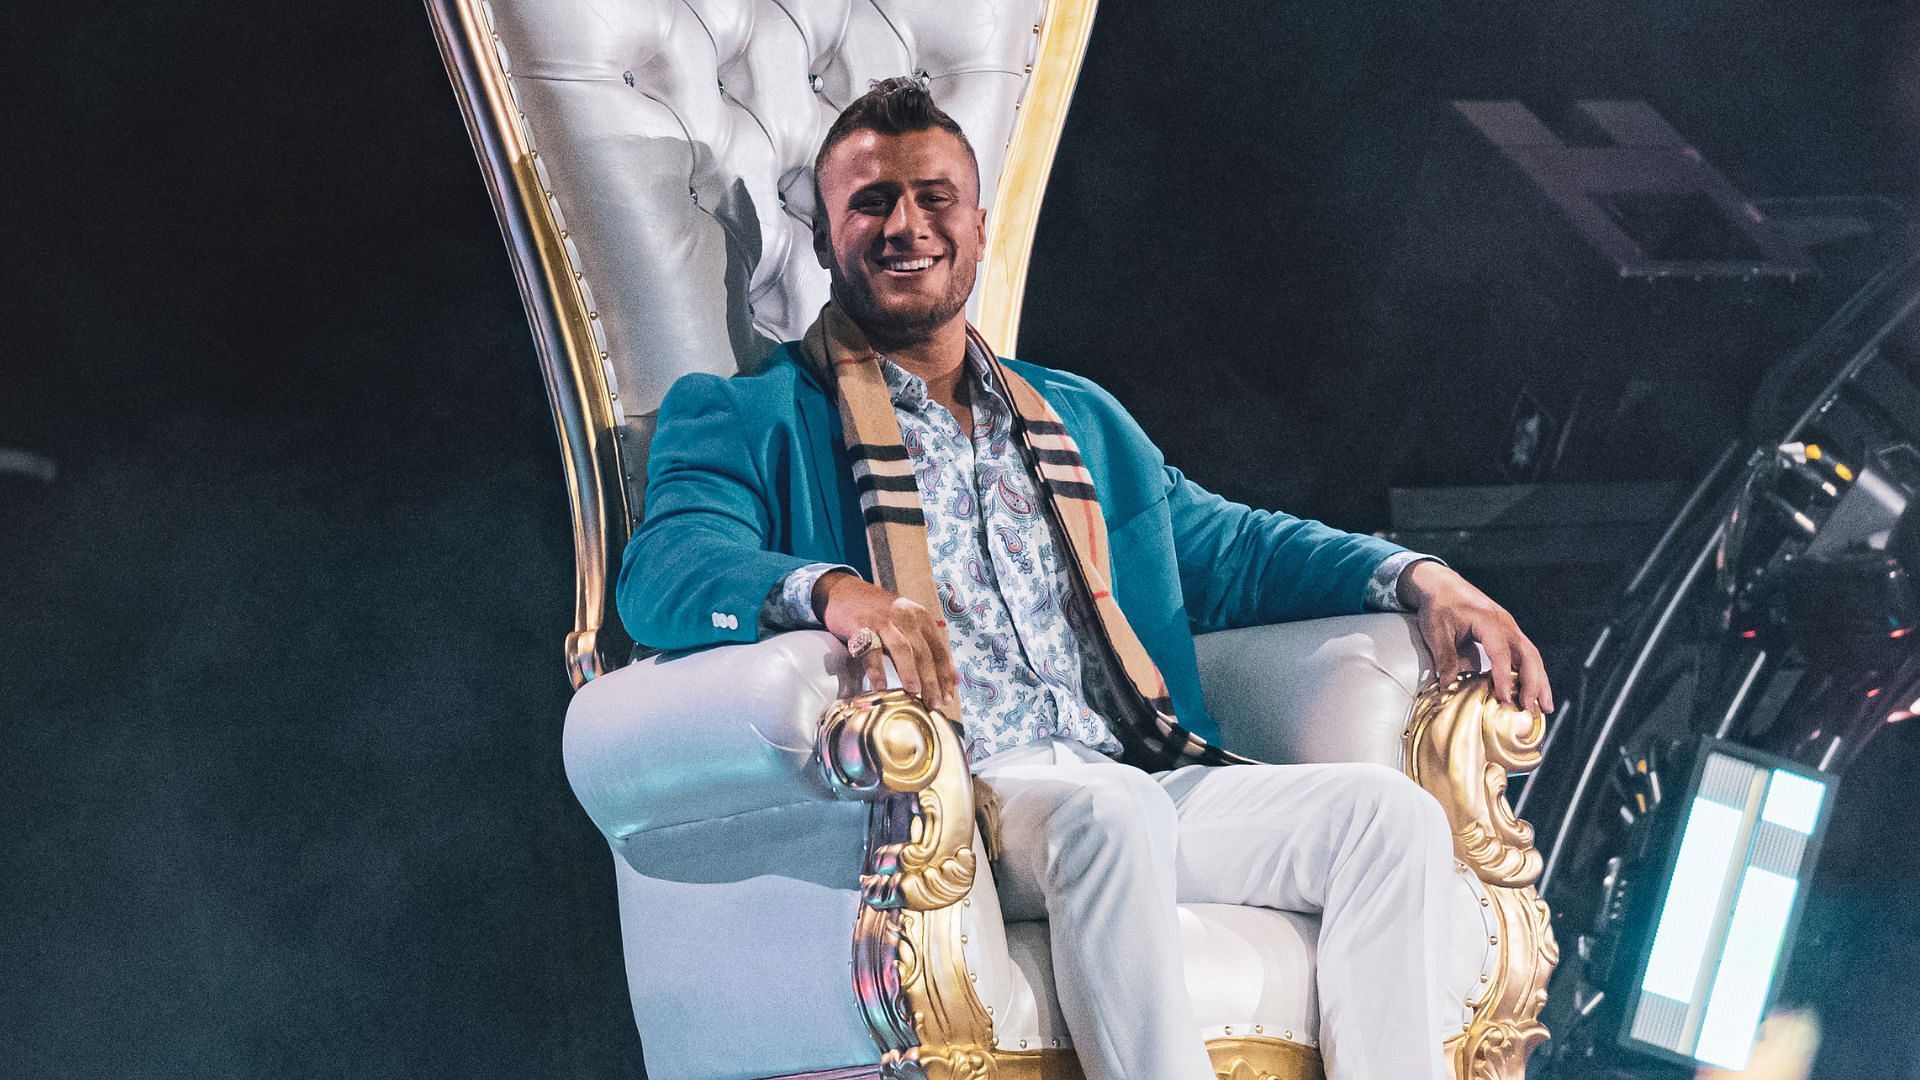 MJF at an AEW Dynamite event in 2022 (credit: Jay Lee Photography)